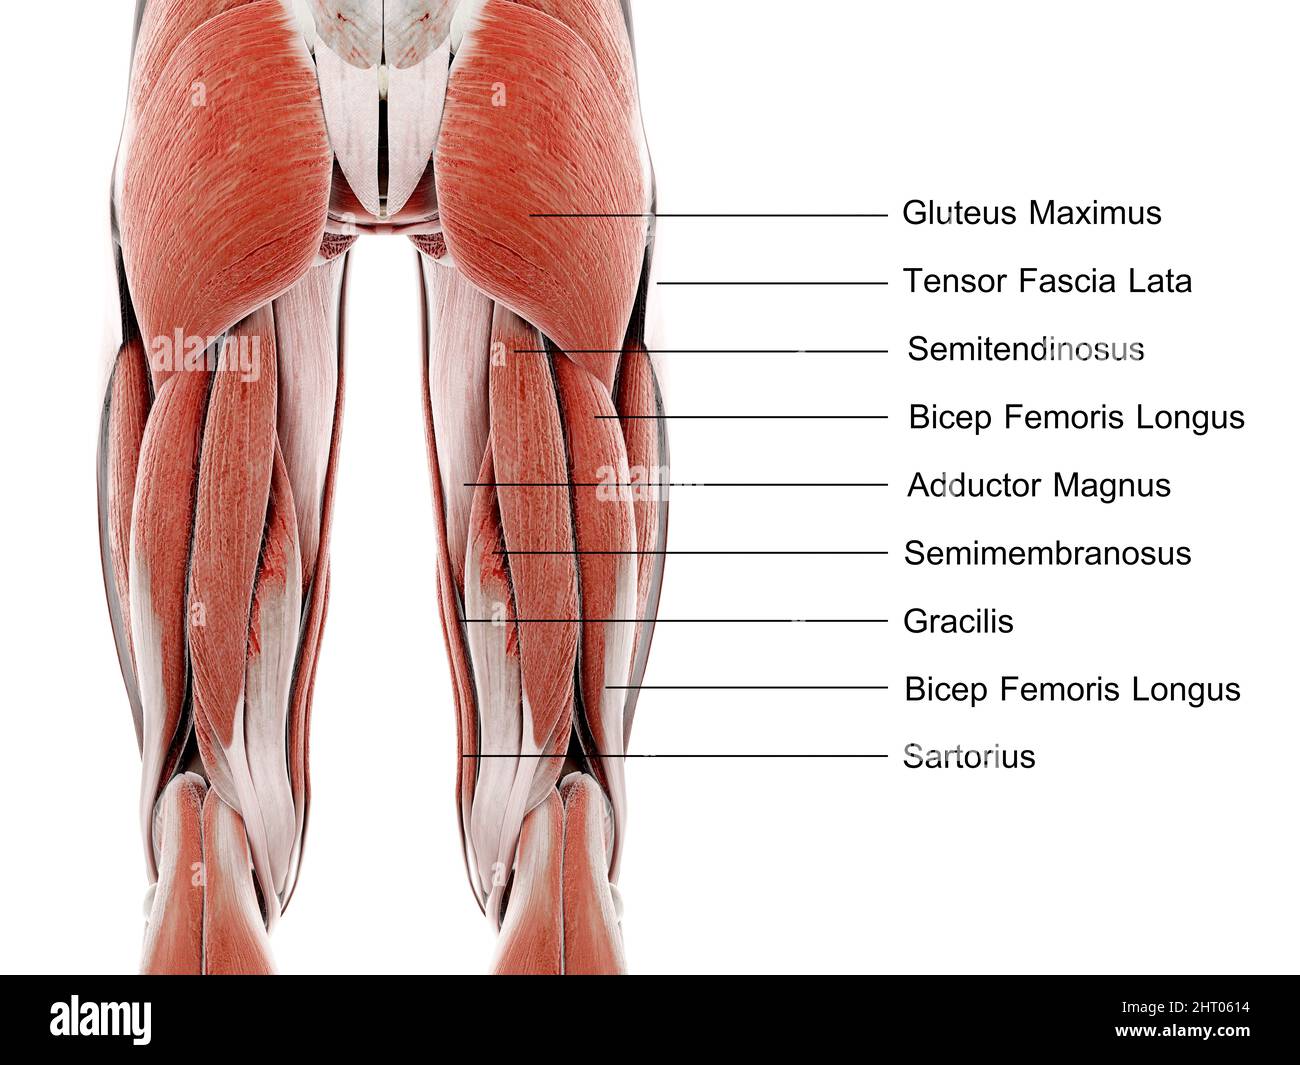 Muscles of the upper leg, illustration Stock Photo - Alamy